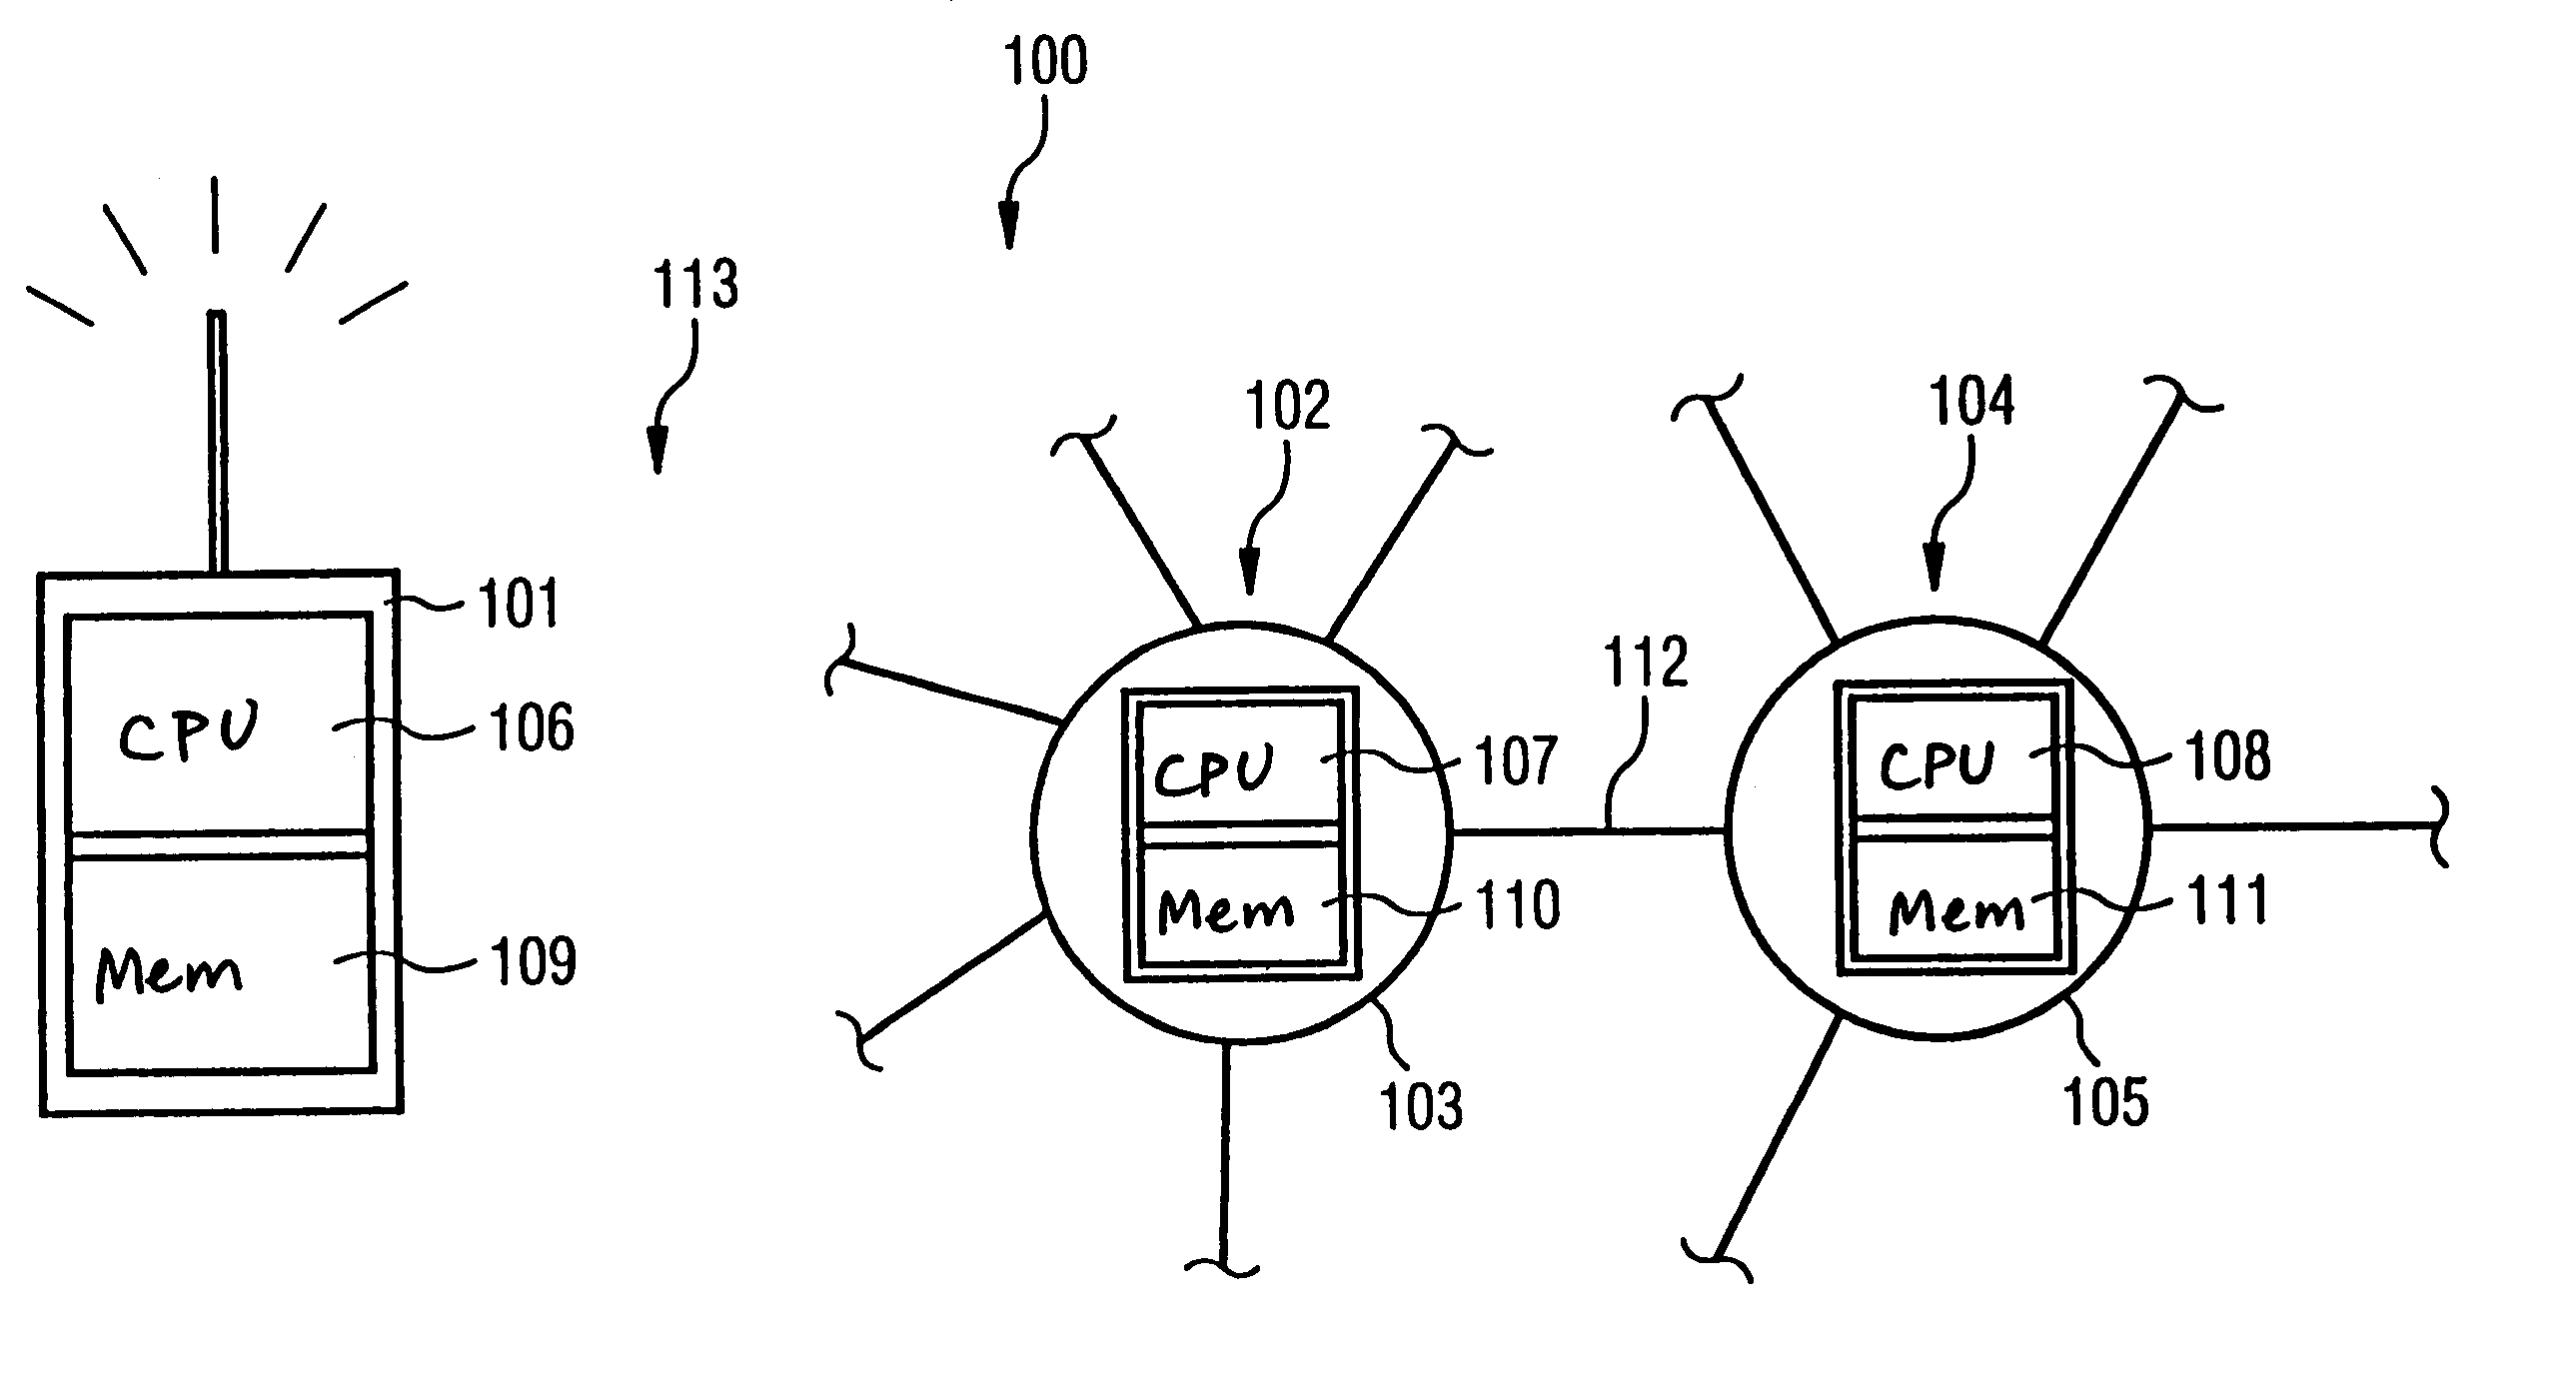 Method and system for verifying the authenticity of a first communication participants in a communications network